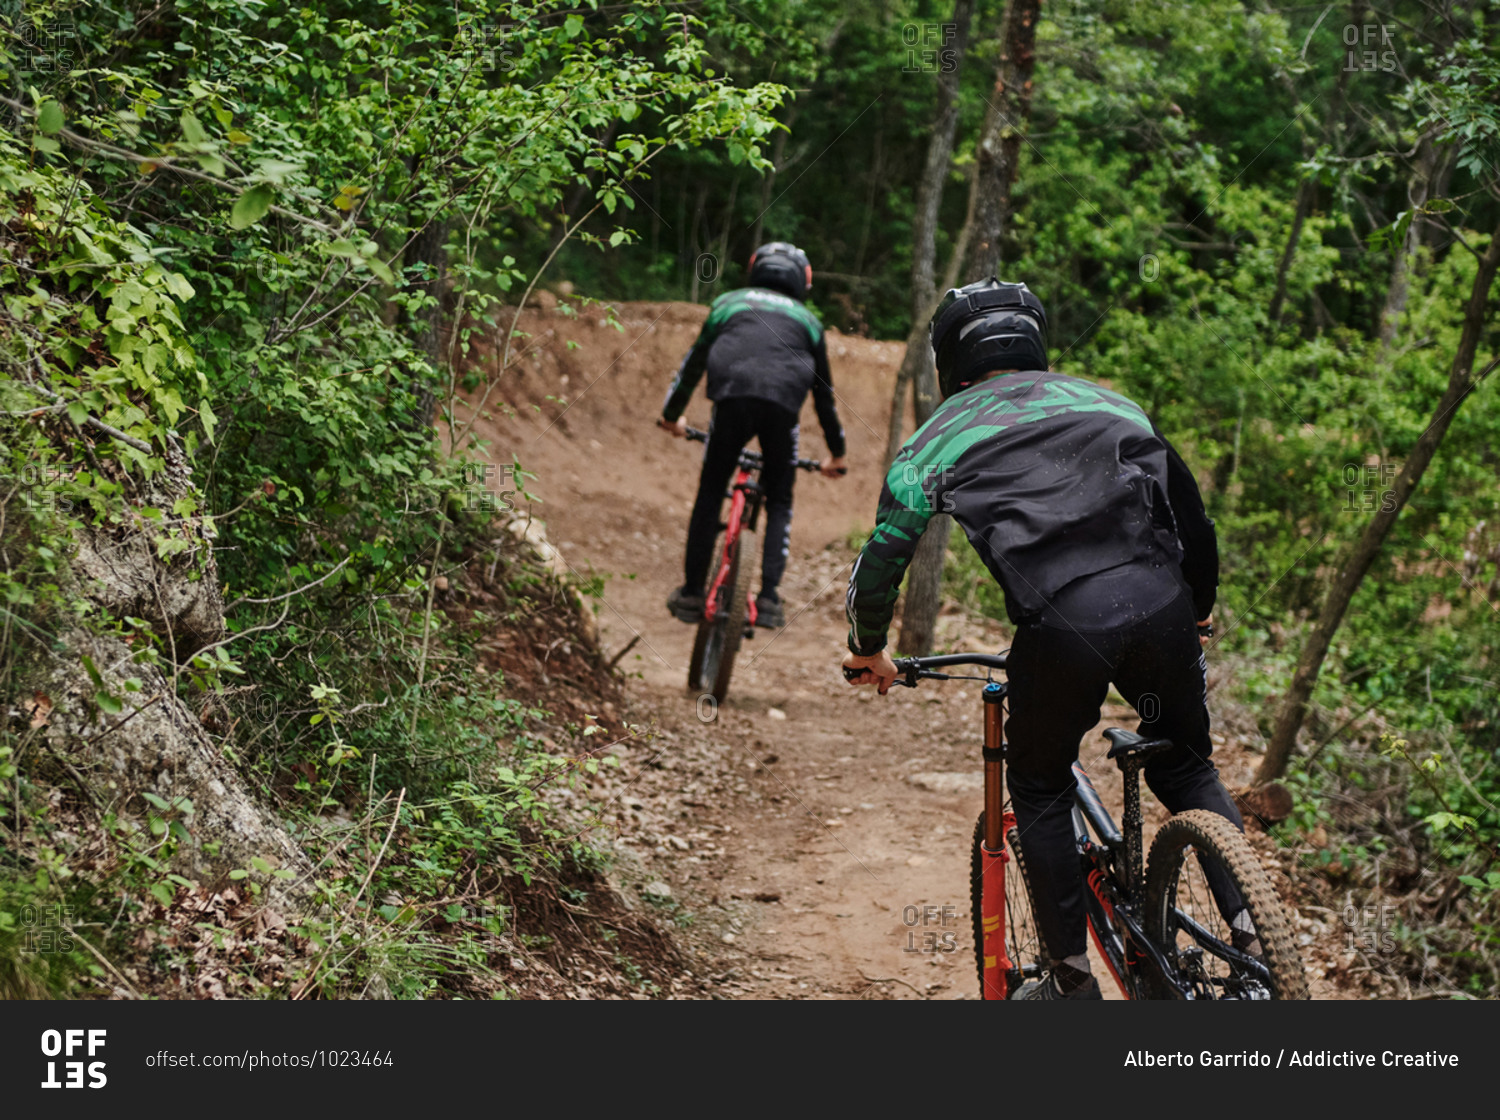 Back view of men in protective helmets riding bikes for downhill along sandy road in forest